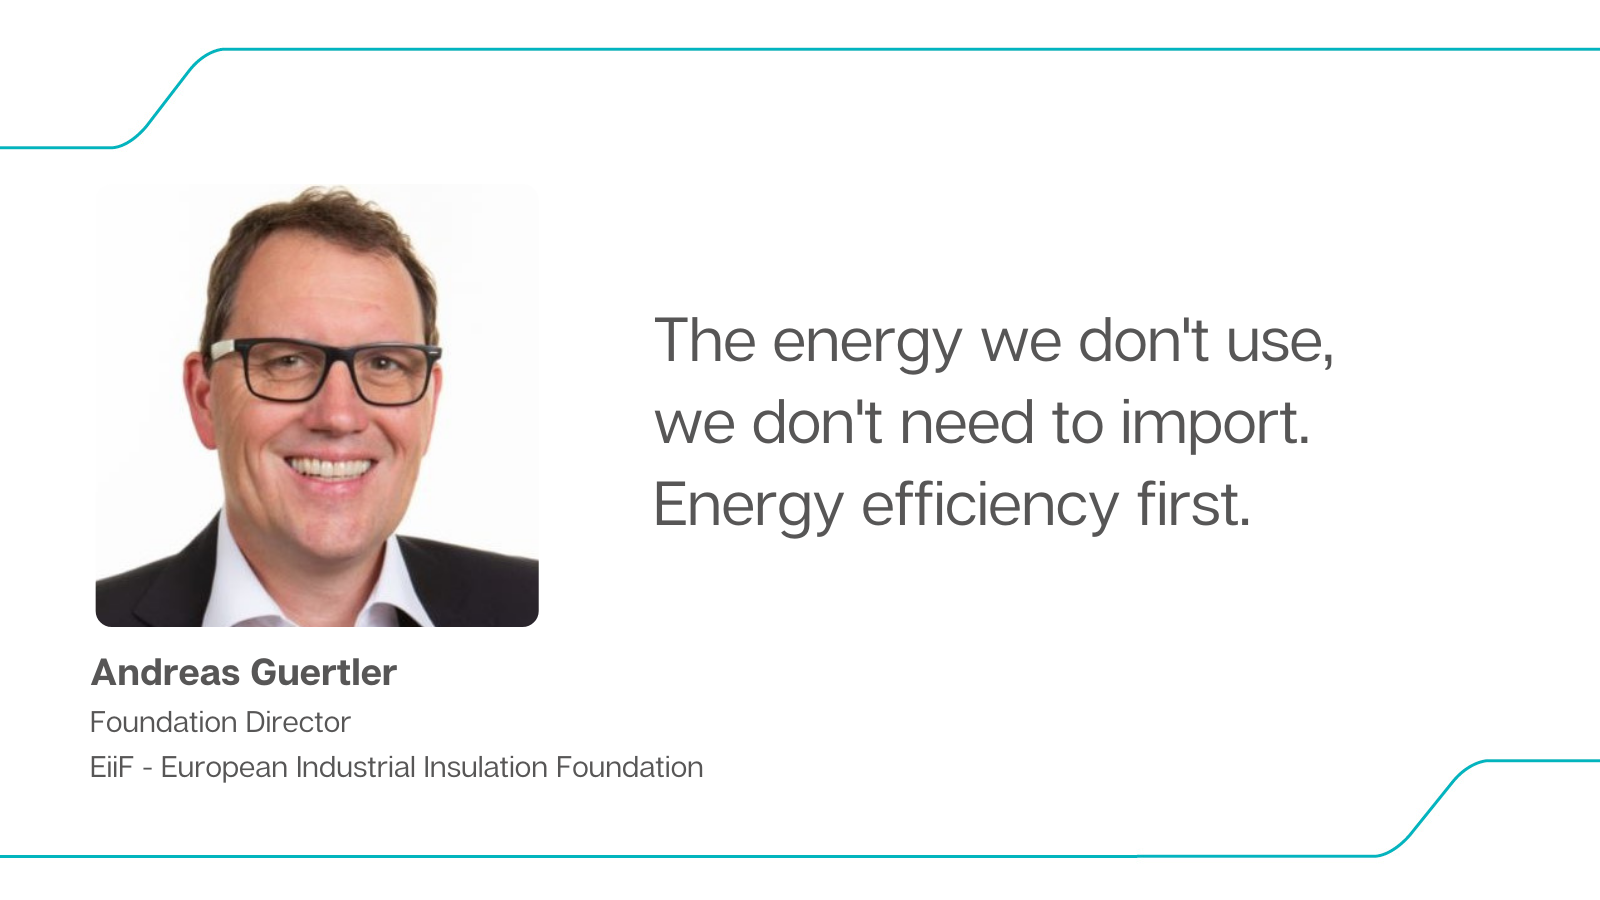 "The energy we don't use, we don't need to import"